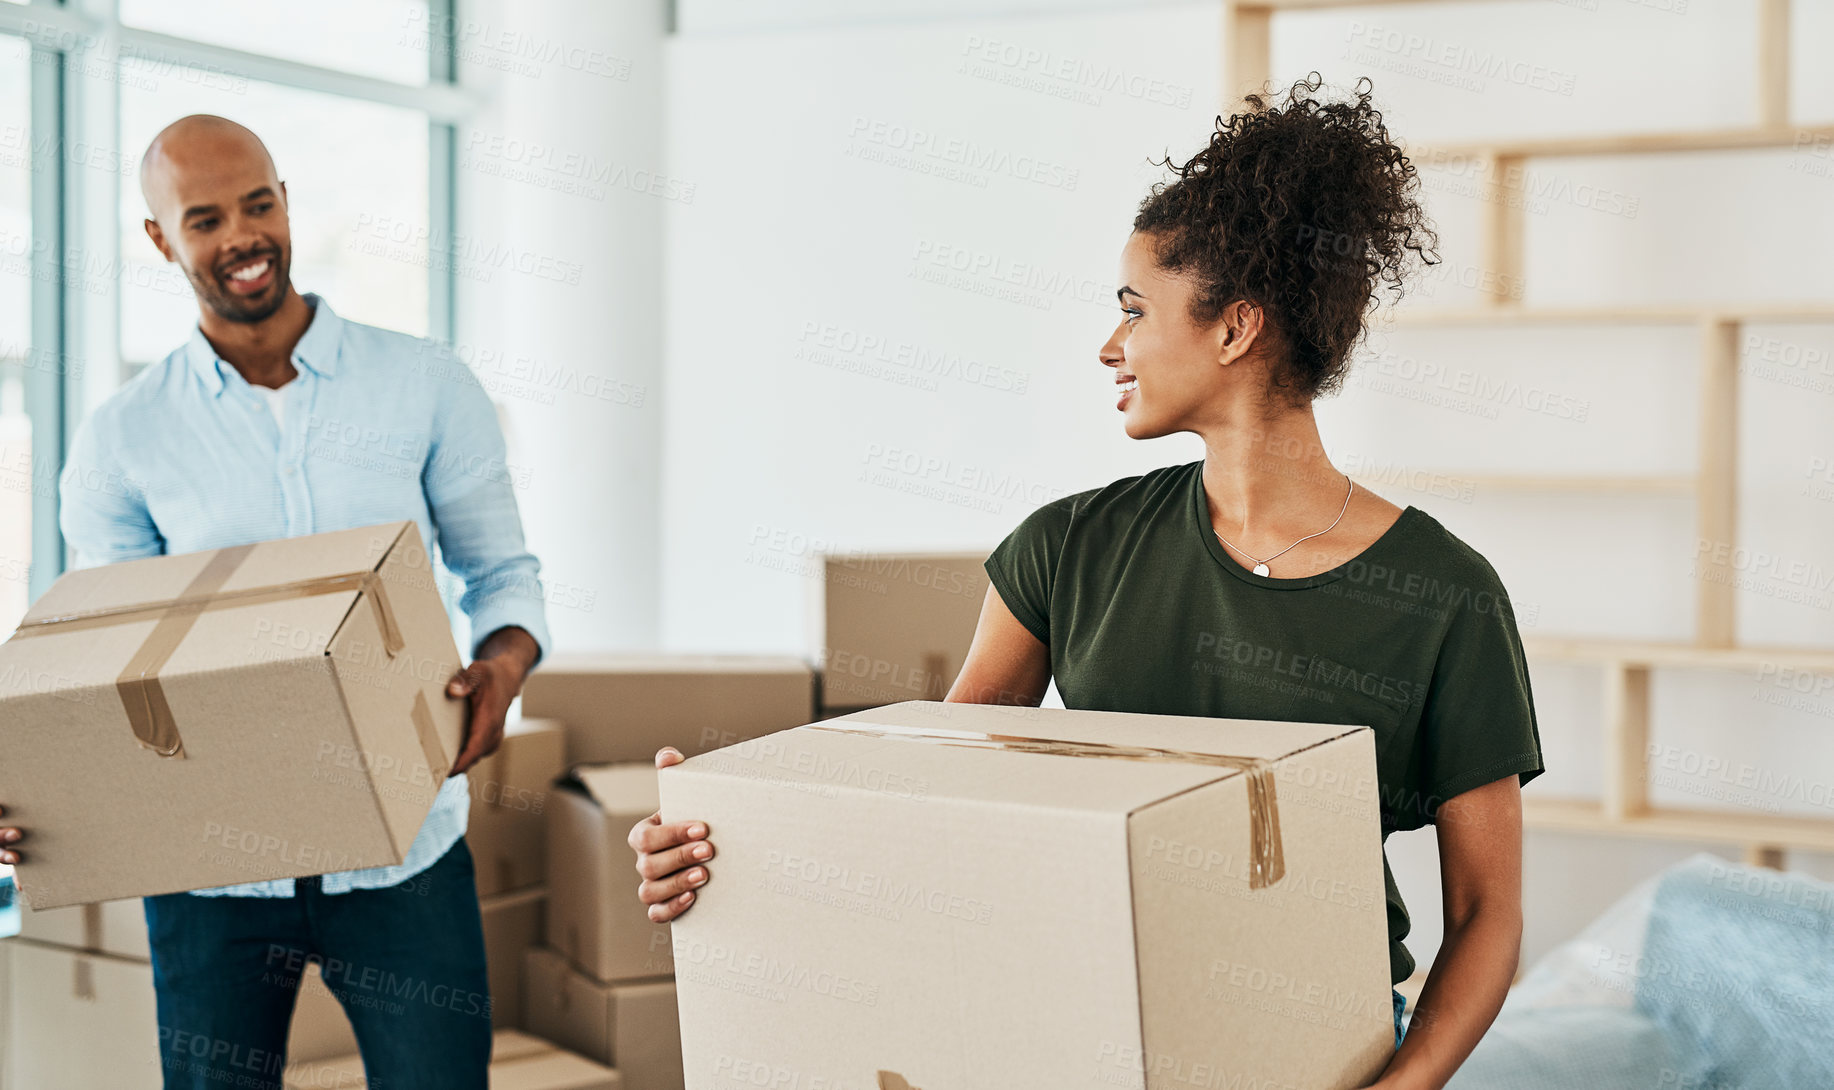 Buy stock photo Shot of a couple young carrying boxes while moving house